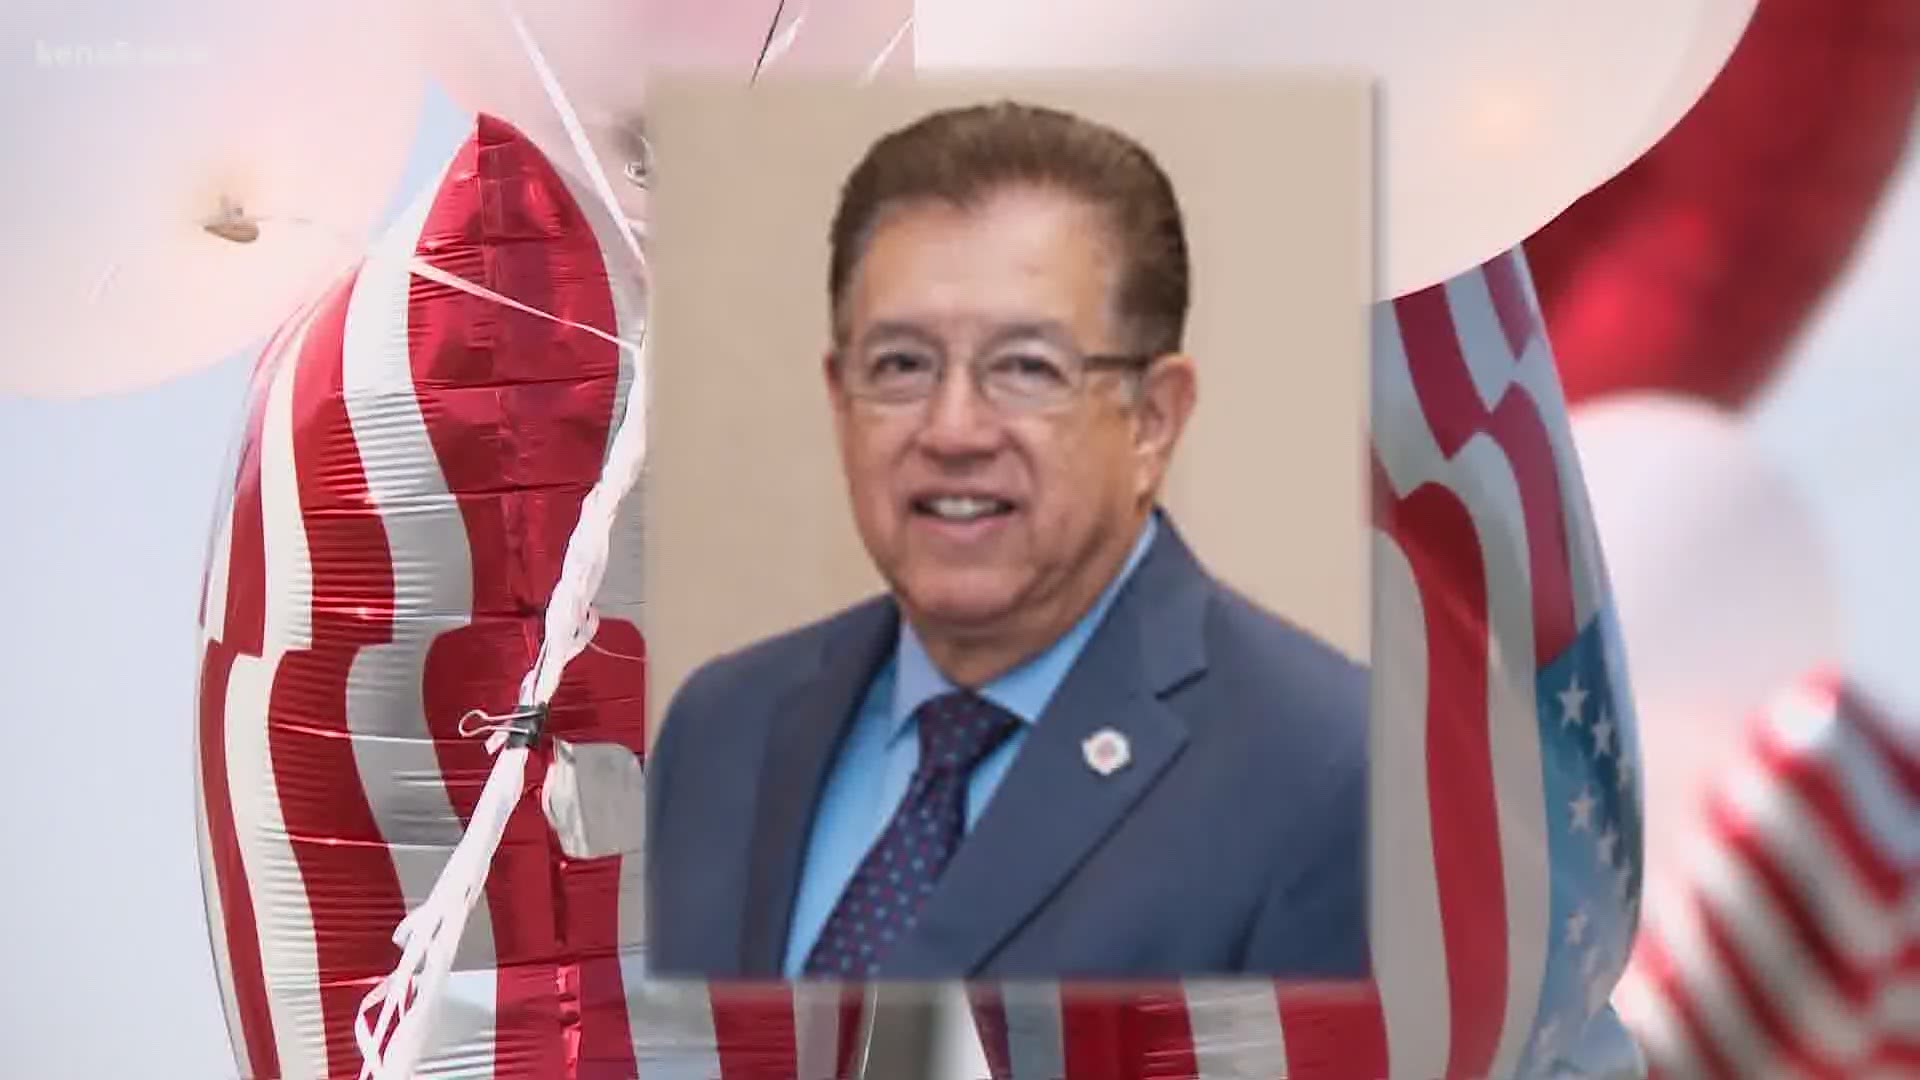 Carlos Martinez, who dedicated his life to advocate for fellow veterans, passed away from coronavirus. On Monday, a ceremony with full military honors was held.